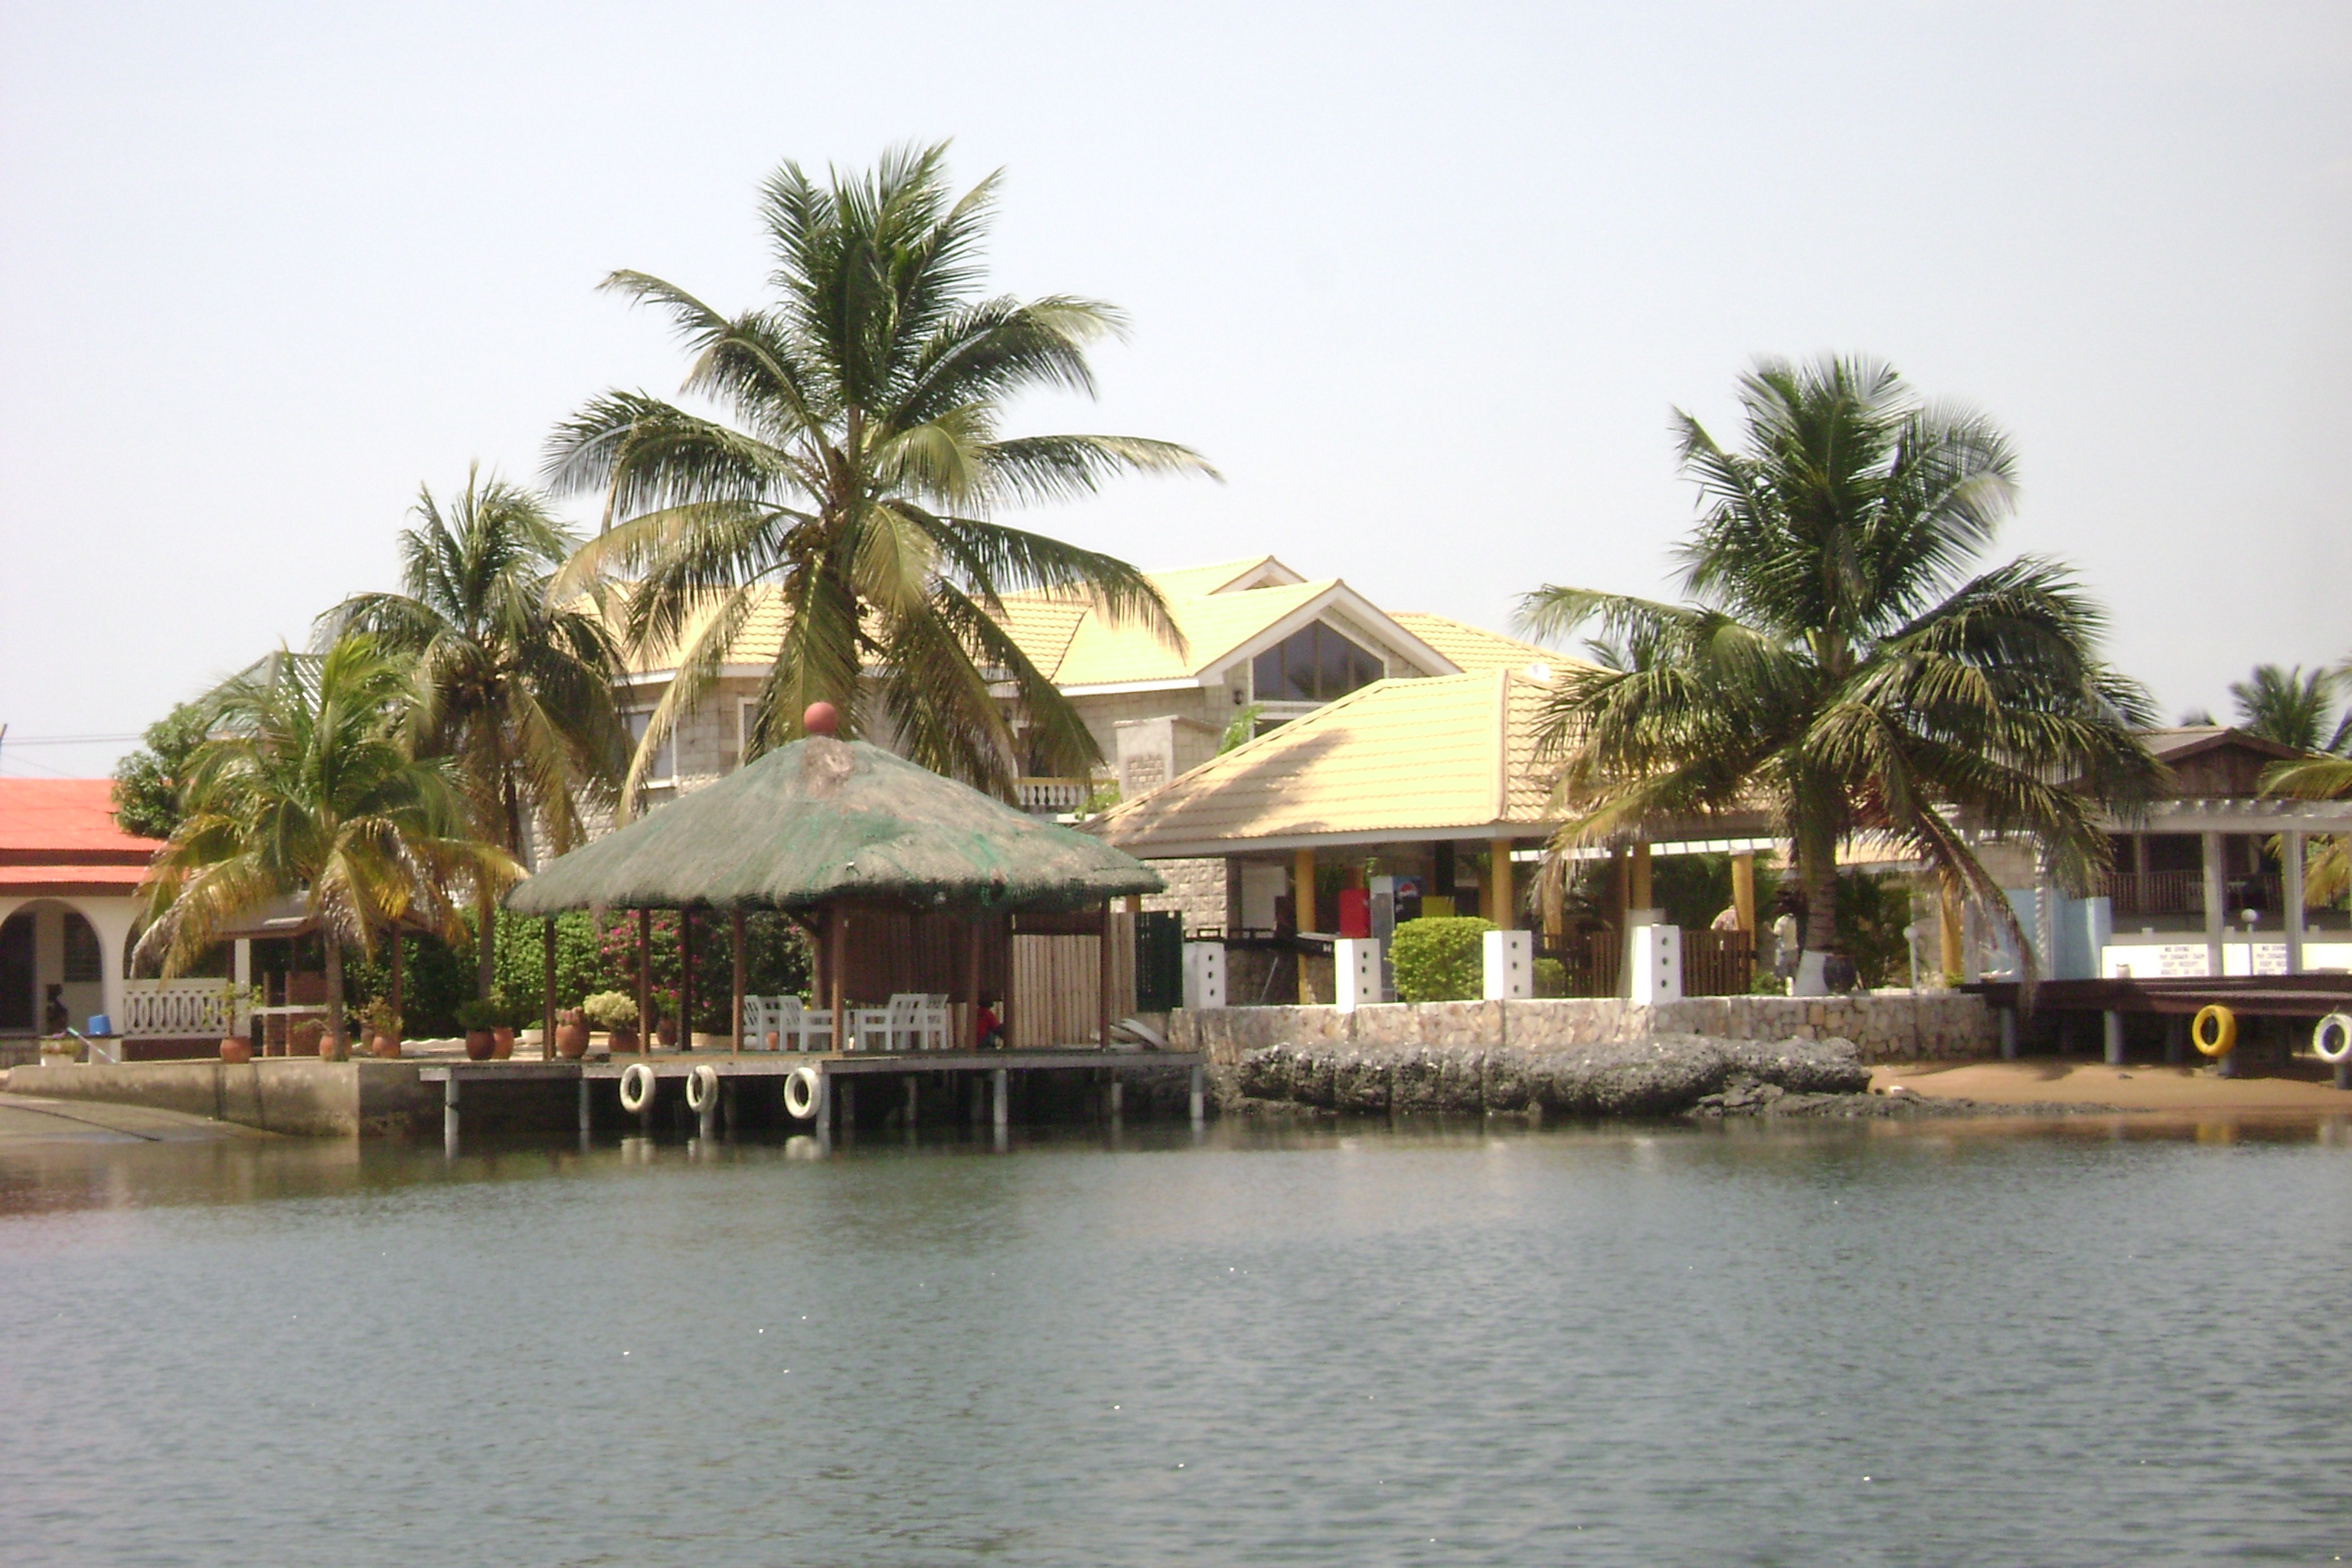 one of the chalets along the river banks.jpg